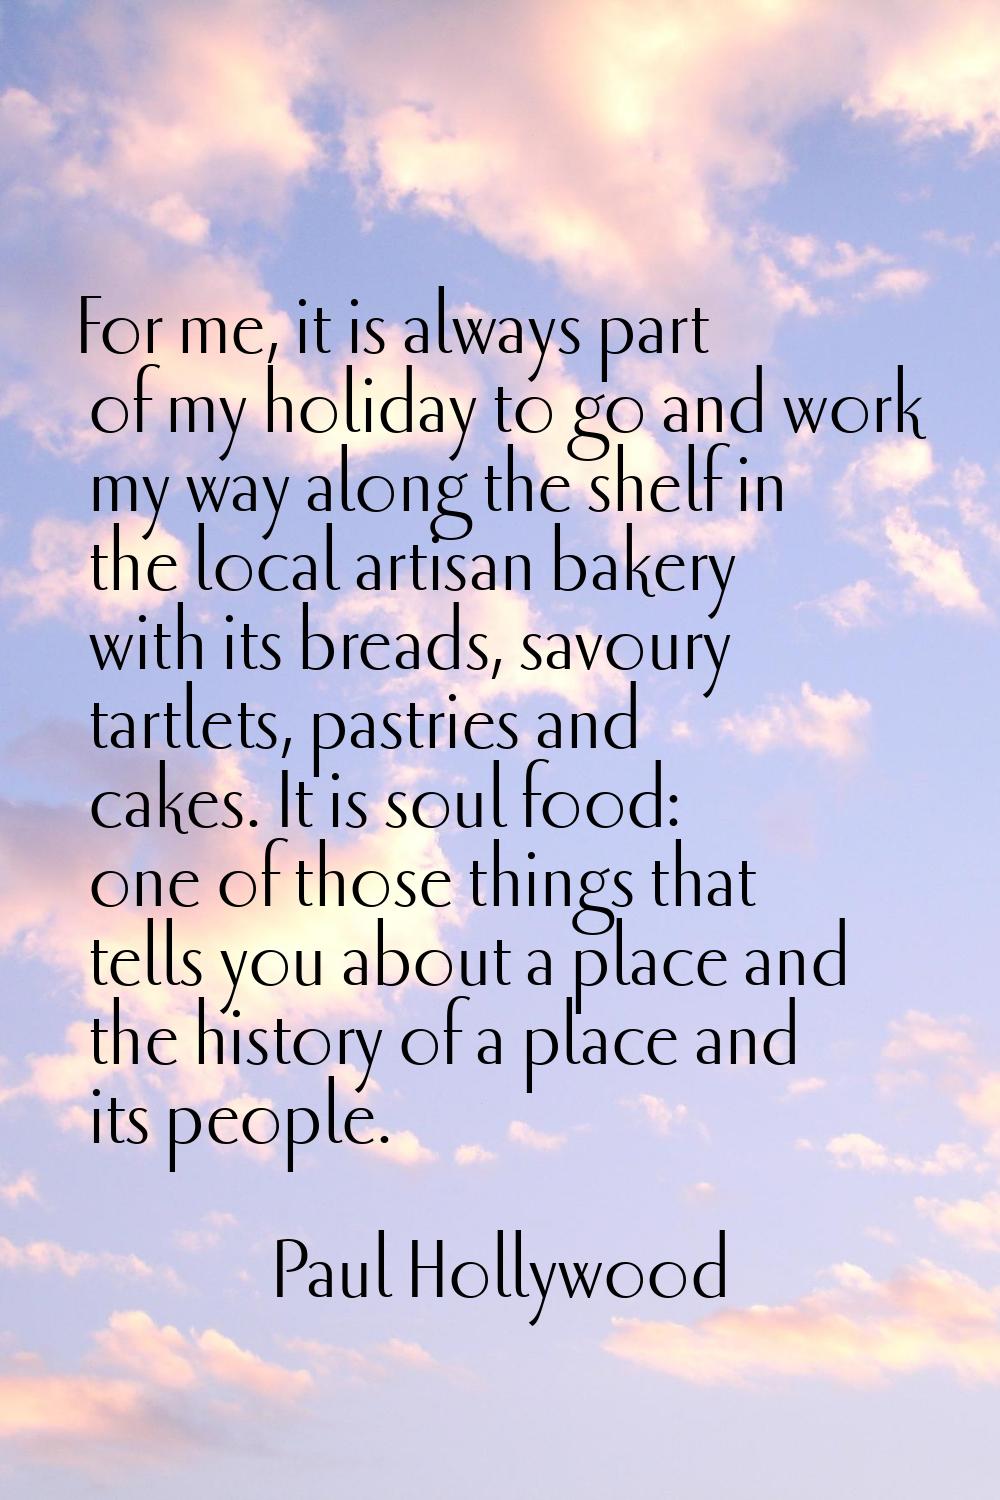 For me, it is always part of my holiday to go and work my way along the shelf in the local artisan 